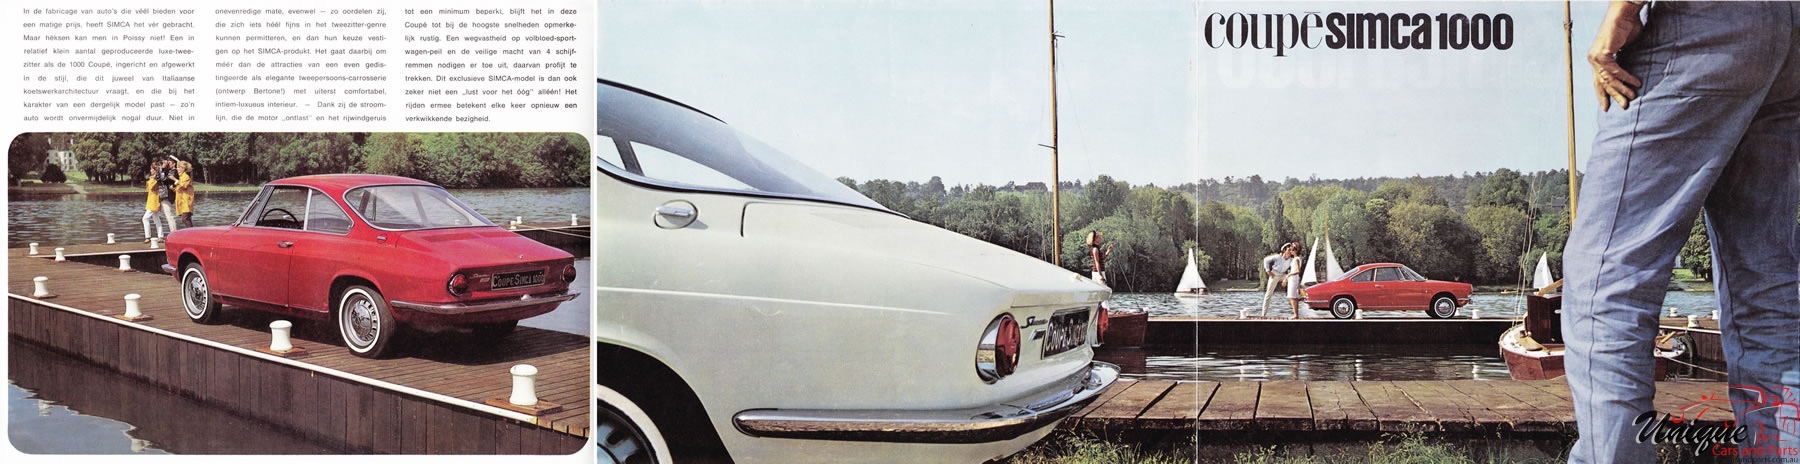 1964 Simca 1000 Coupe (Netherlands) Brochure Page 5